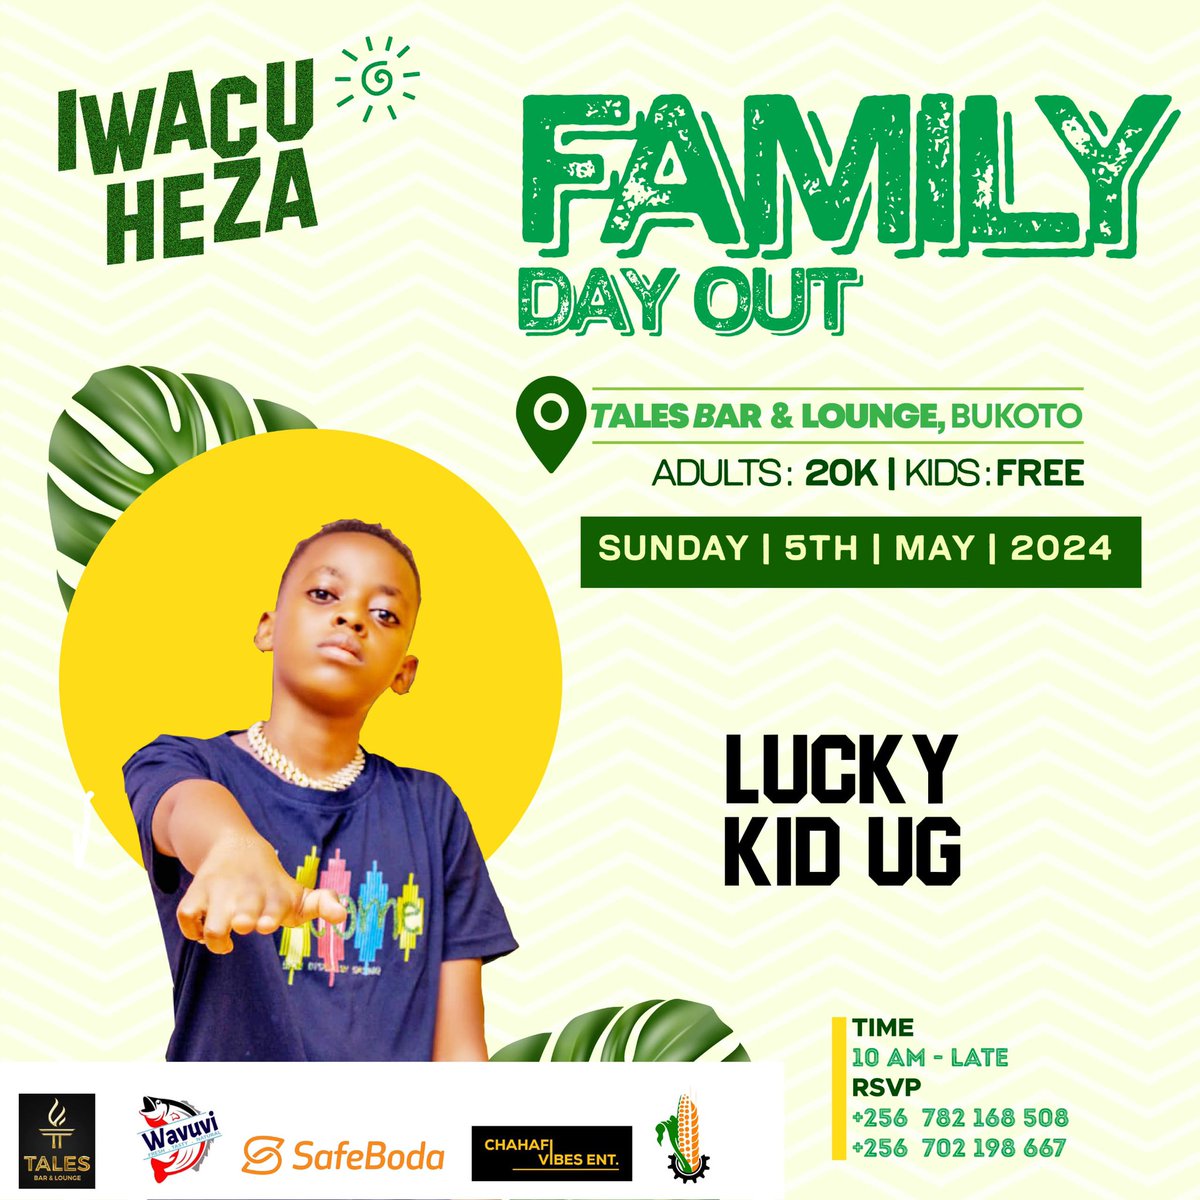 Don’t miss the #FamilyDayOut, the first of its kind in Kampala🔥 It will be going down on 5th May,2024 at Tales Bar and Lounge. #IwacuHeza #TweseTuribamwe